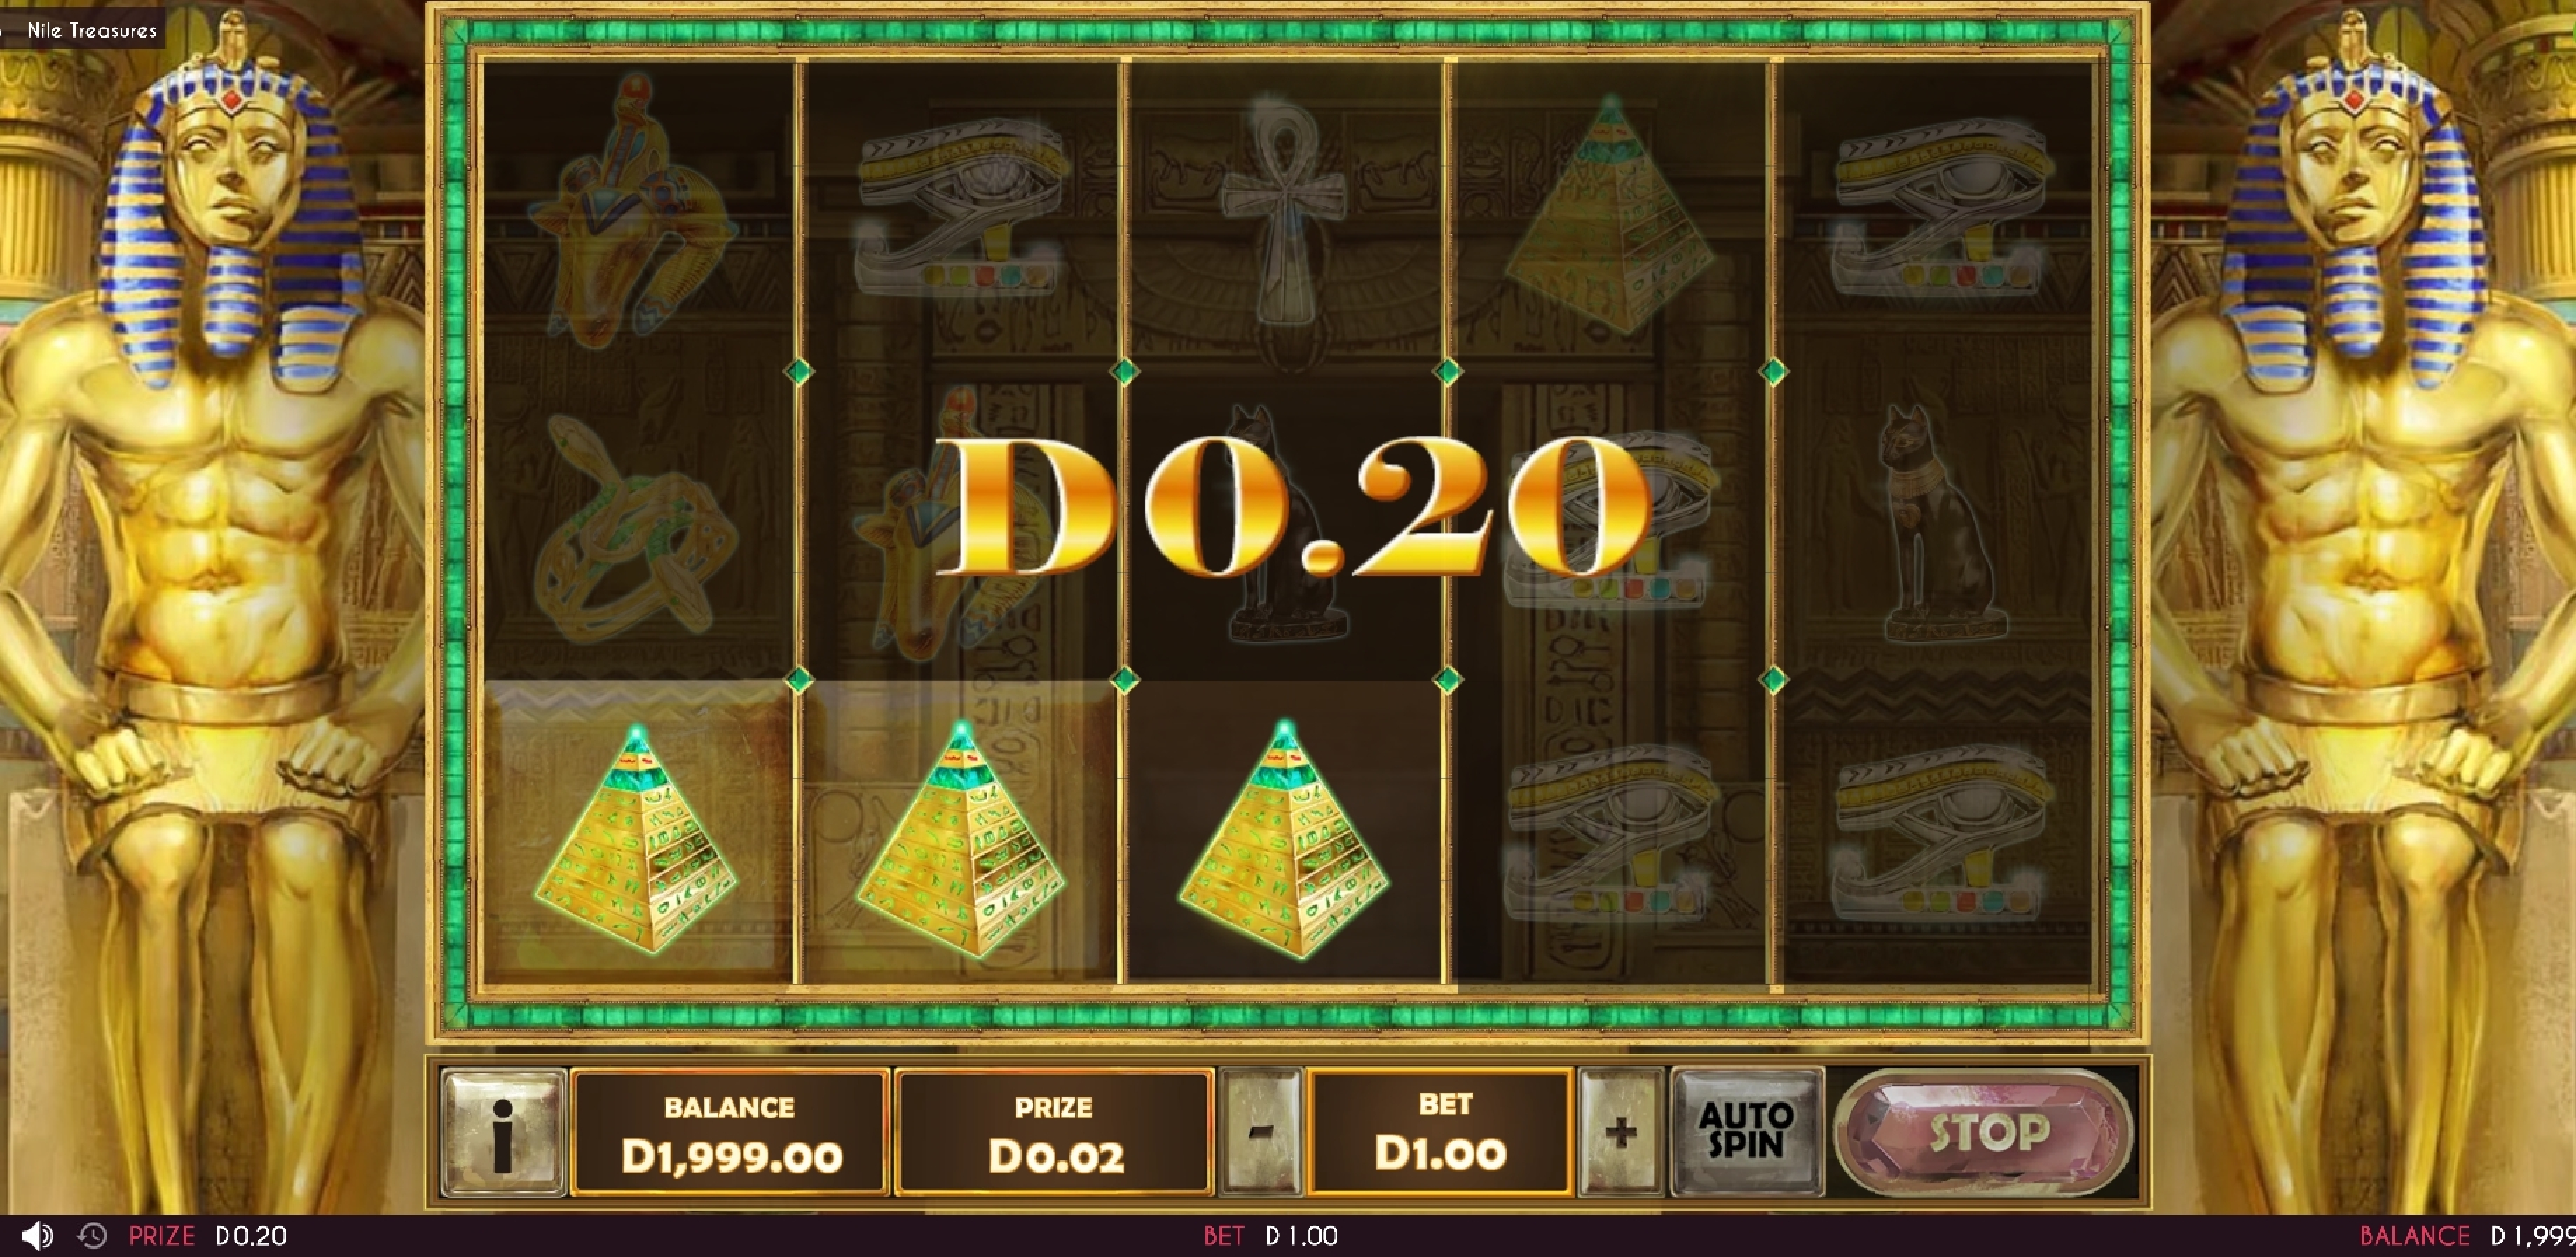 Win Money in Nile Treasures Free Slot Game by Triple Cherry